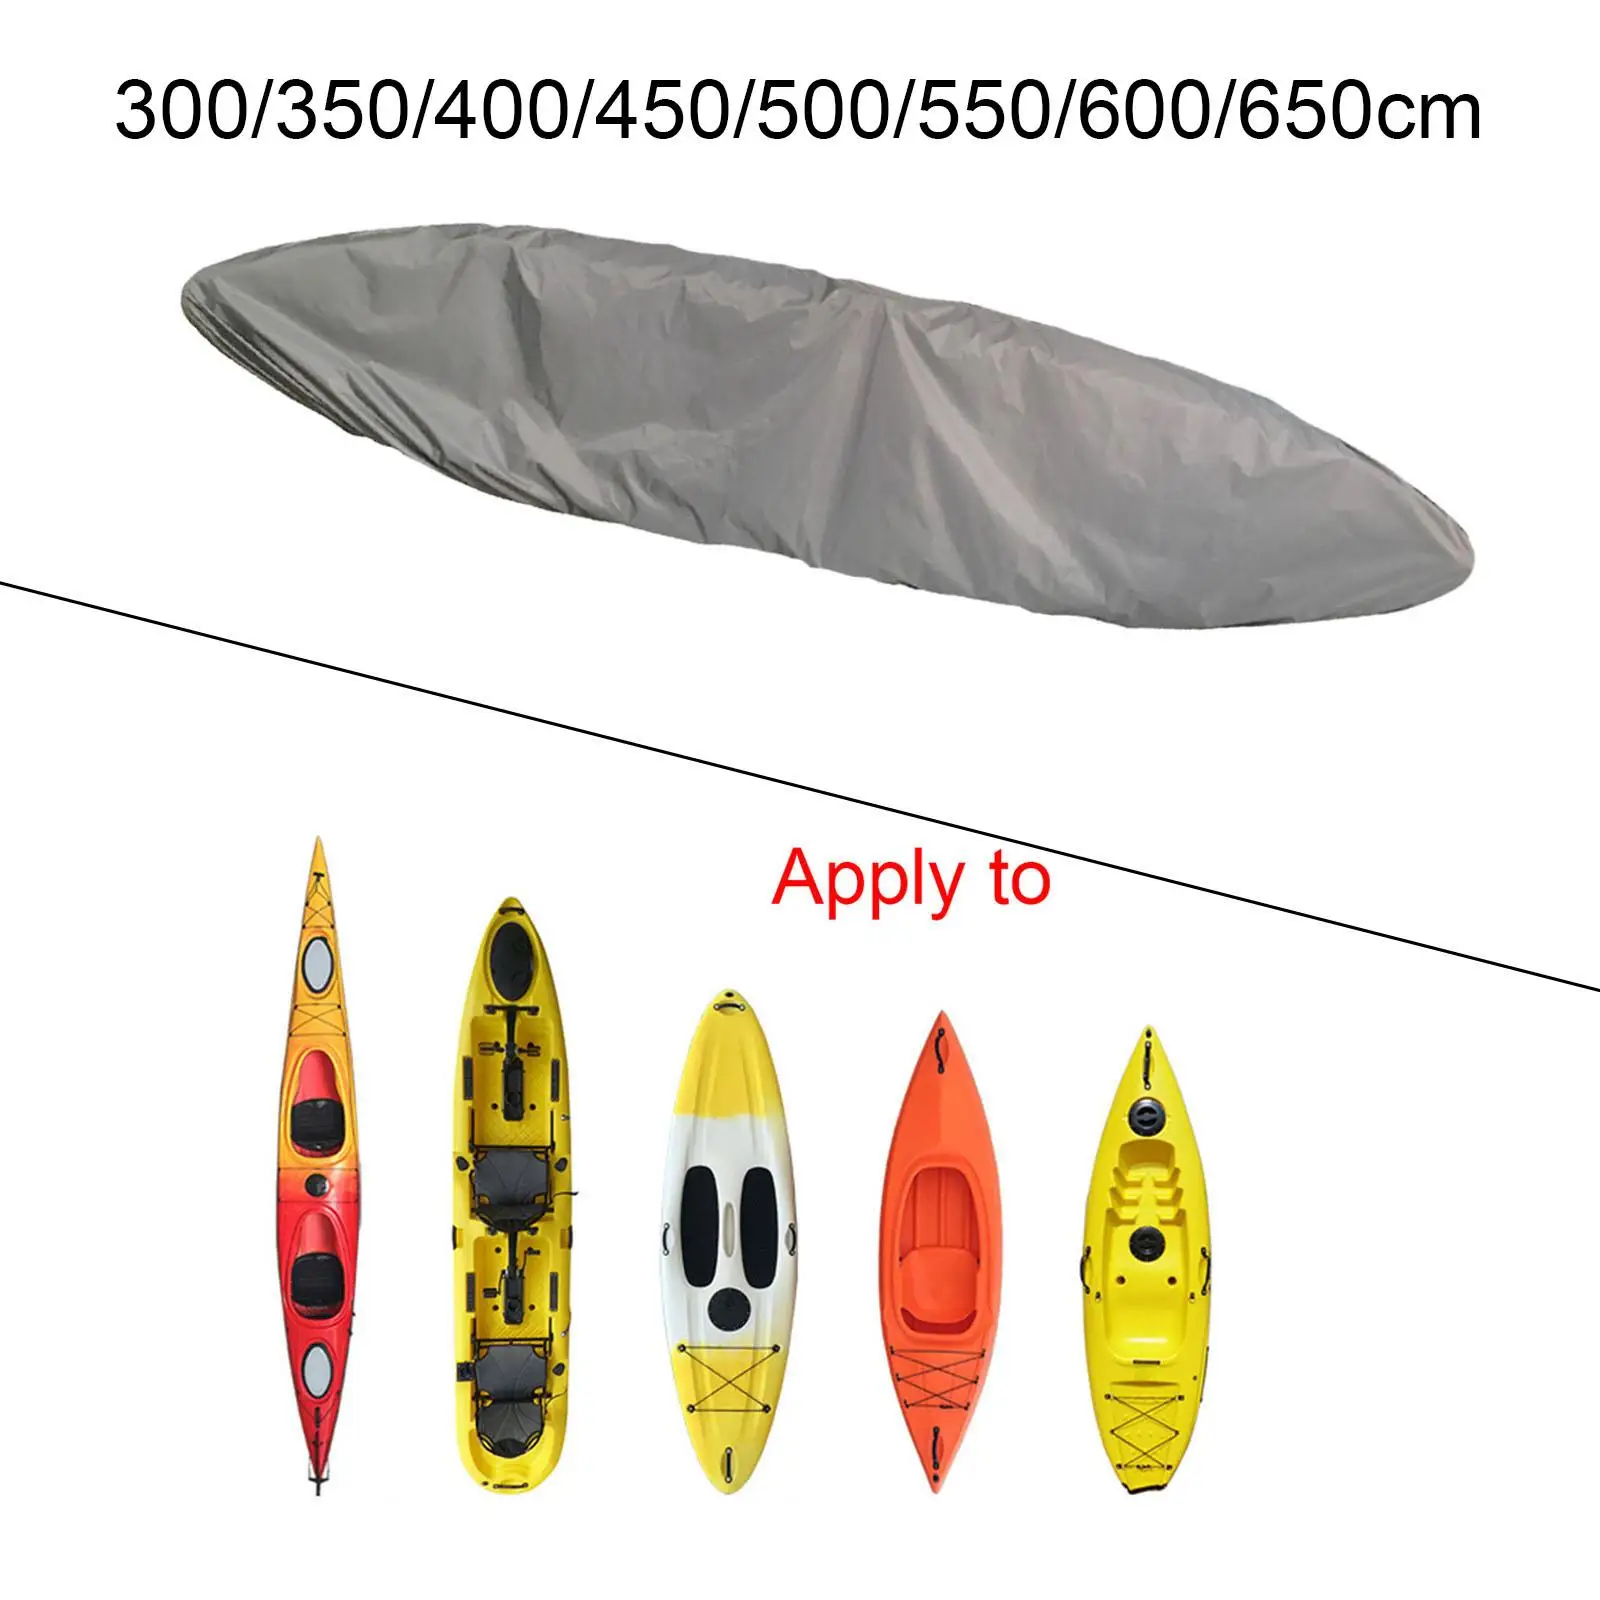 Canoe Cover Dustproof Transport Protector Boat Parts Boat Storage Cover Waterproof Kayak Cover for Kayaking Drifting Boating